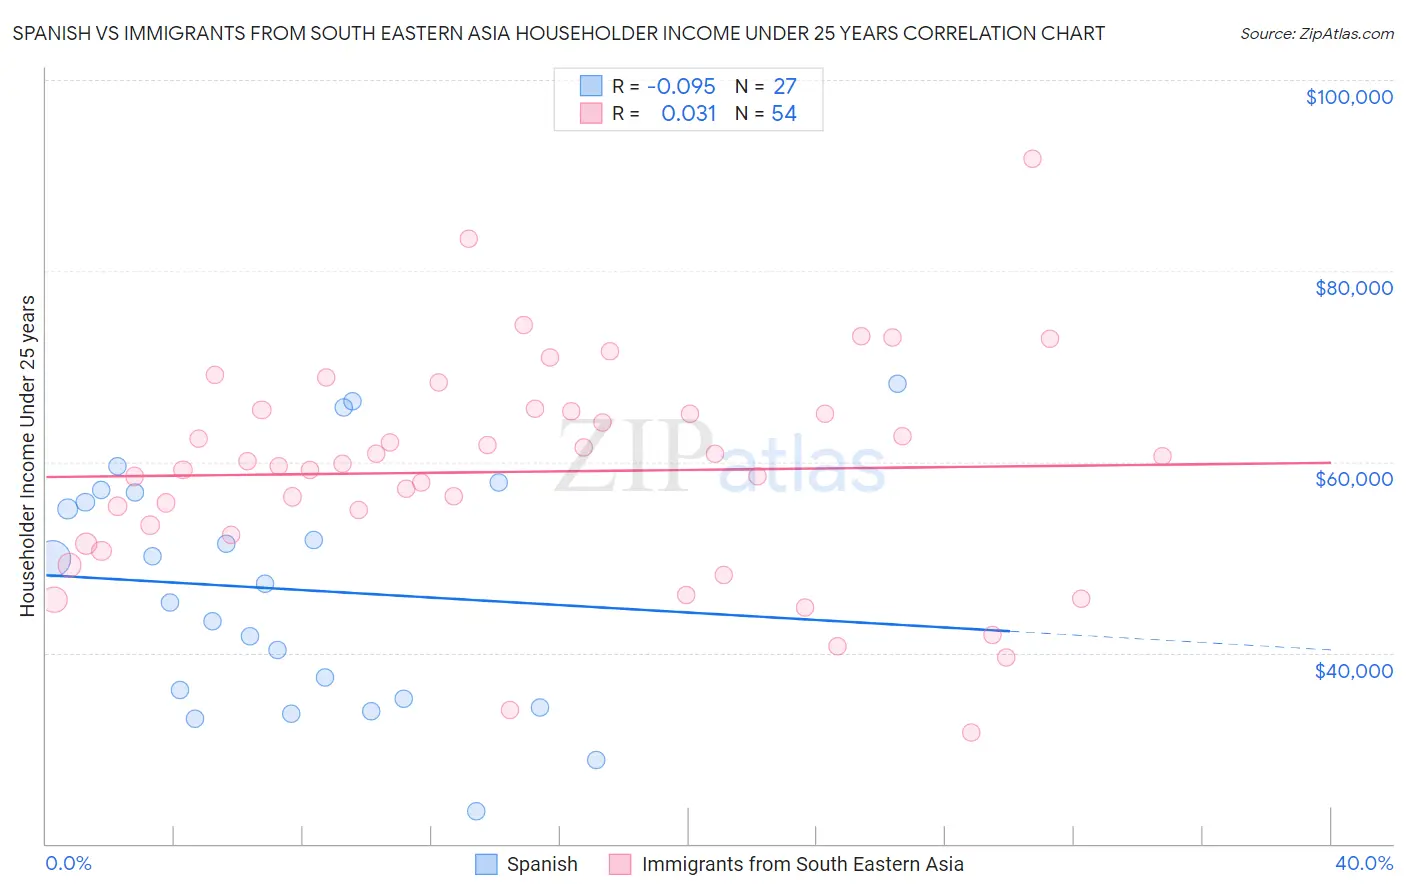 Spanish vs Immigrants from South Eastern Asia Householder Income Under 25 years